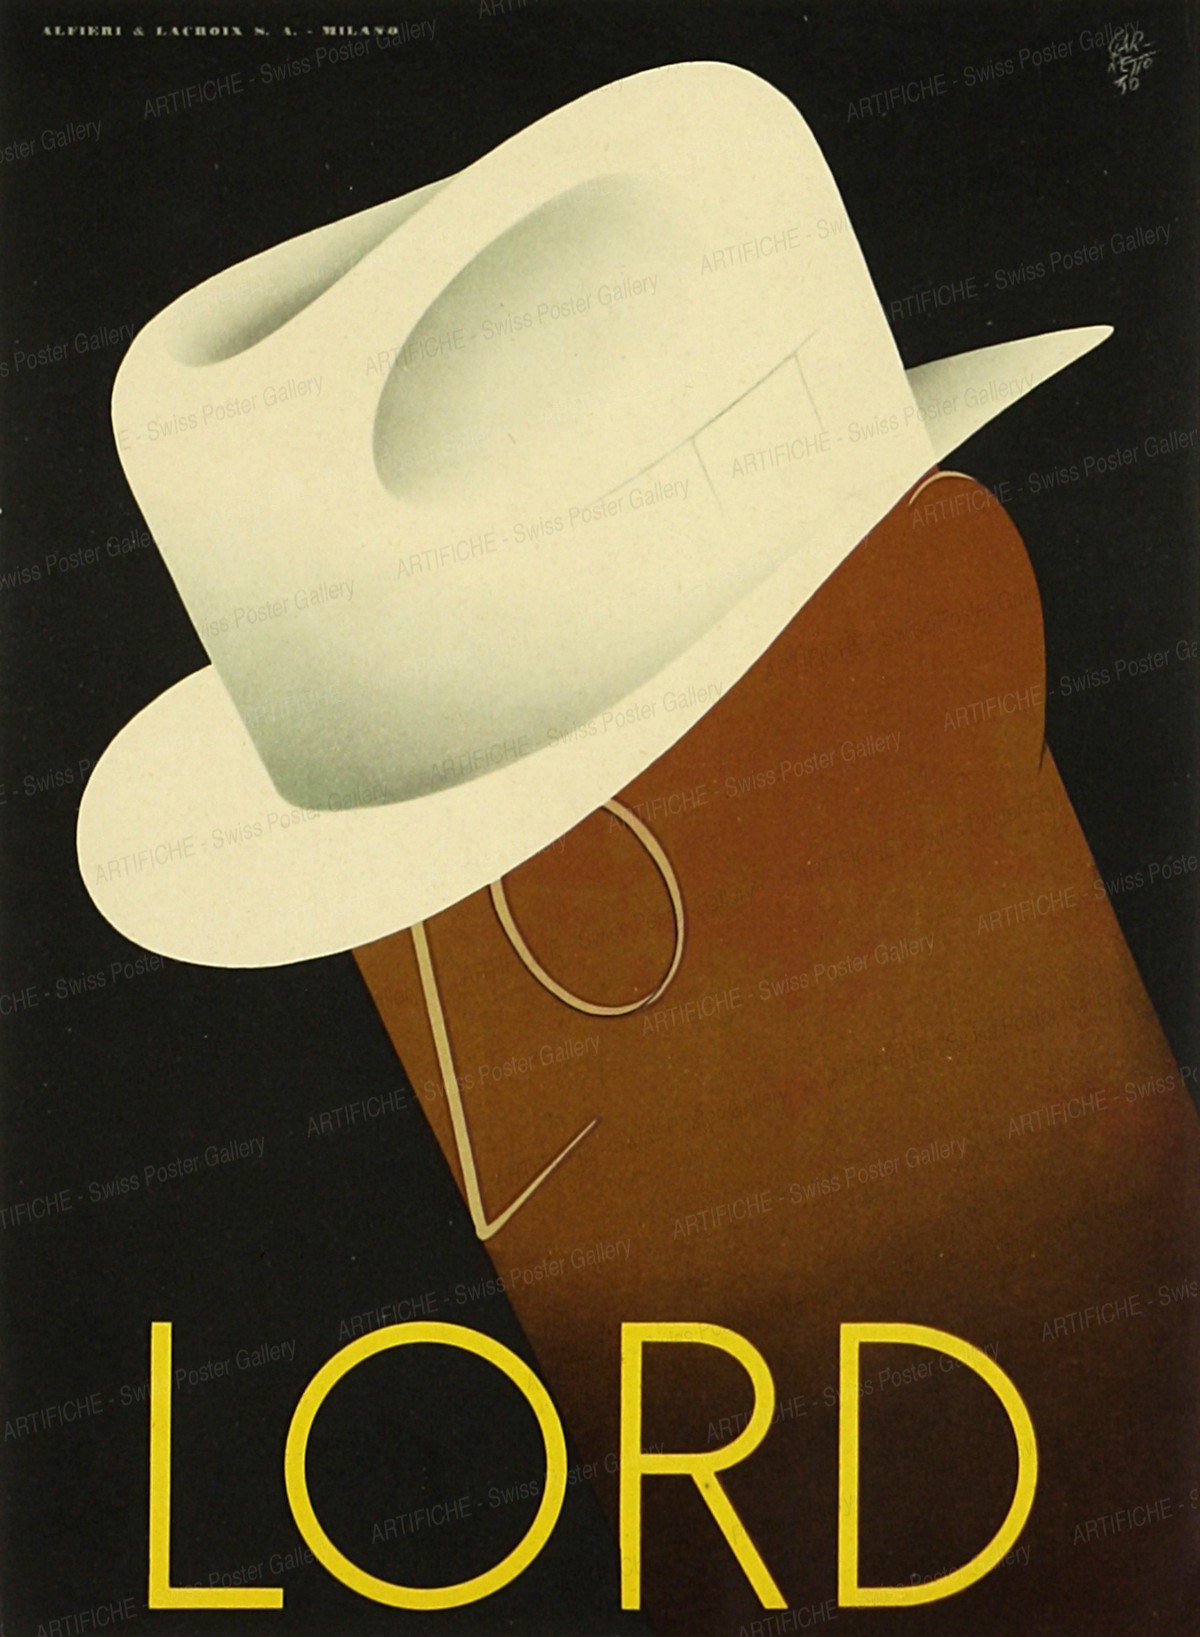 LORD (vintage print ad, mounted; size 33 x 42 cm), Paolo F. Garretto